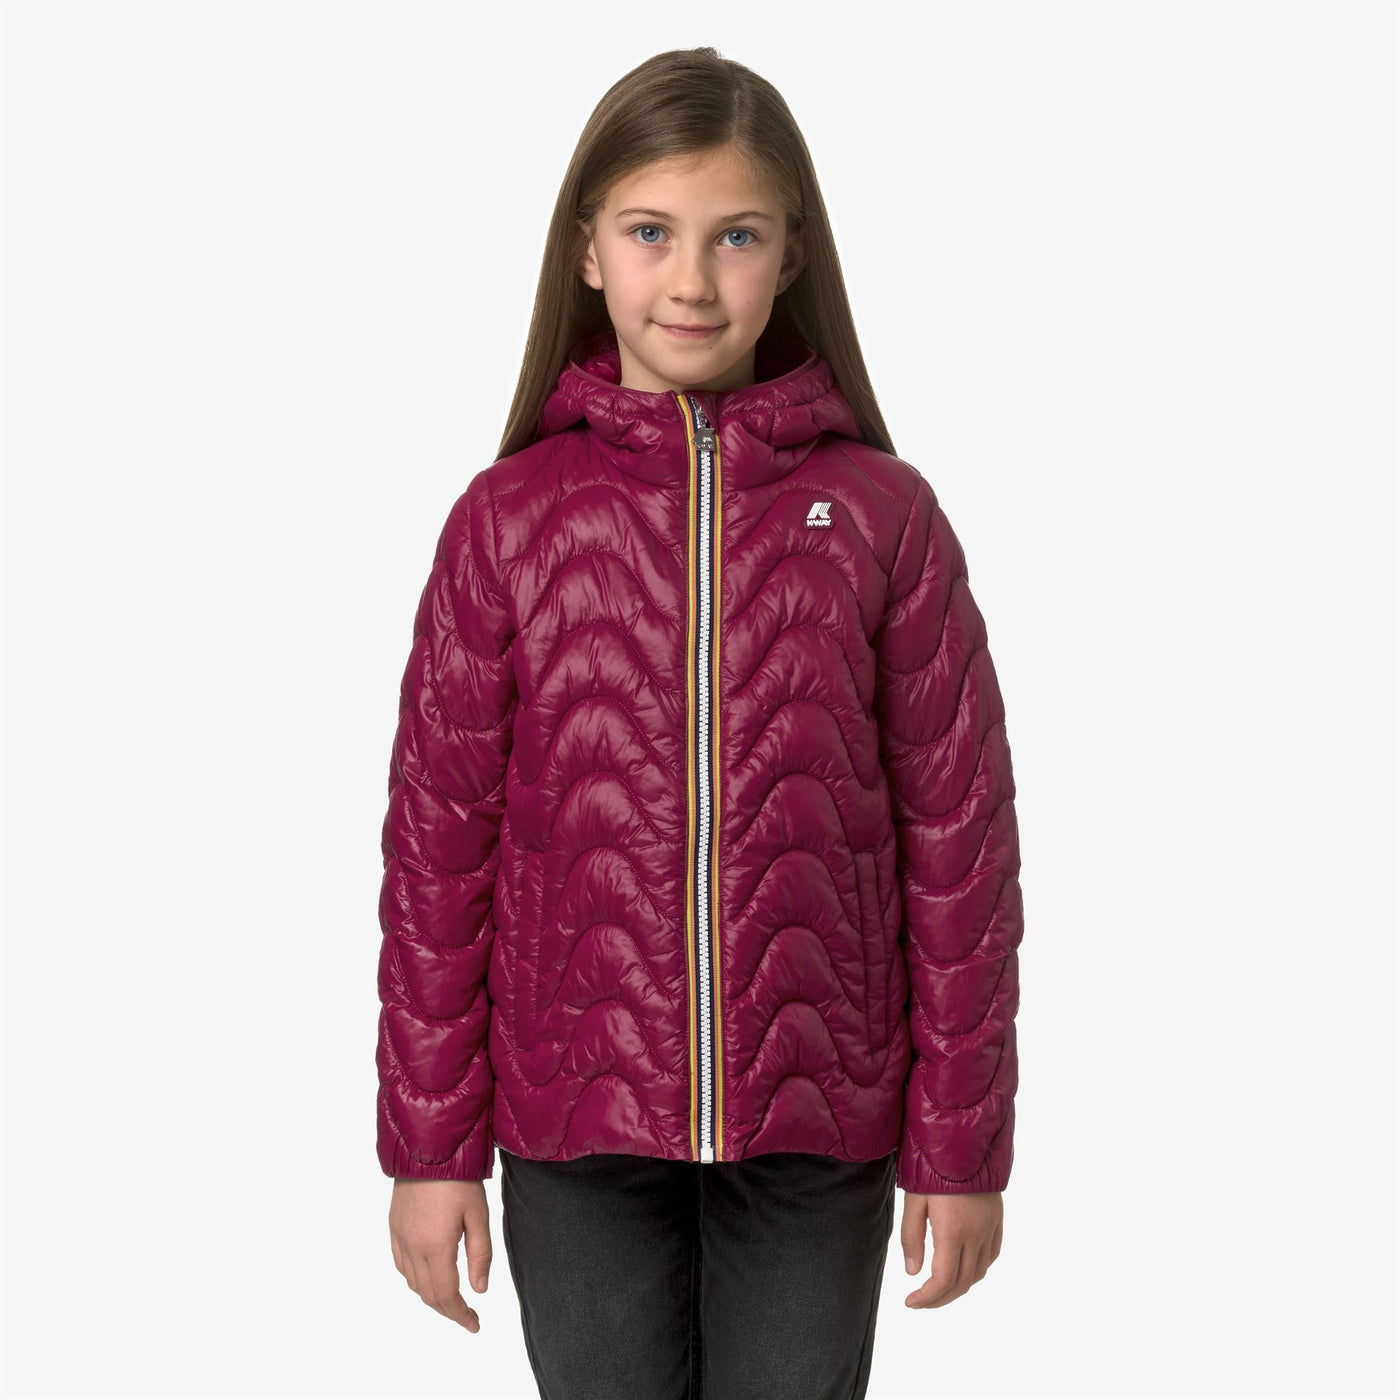 Jackets Girl P. MADLAINE QUILTED WARM Short RED DK Dressed Back (jpg Rgb)		